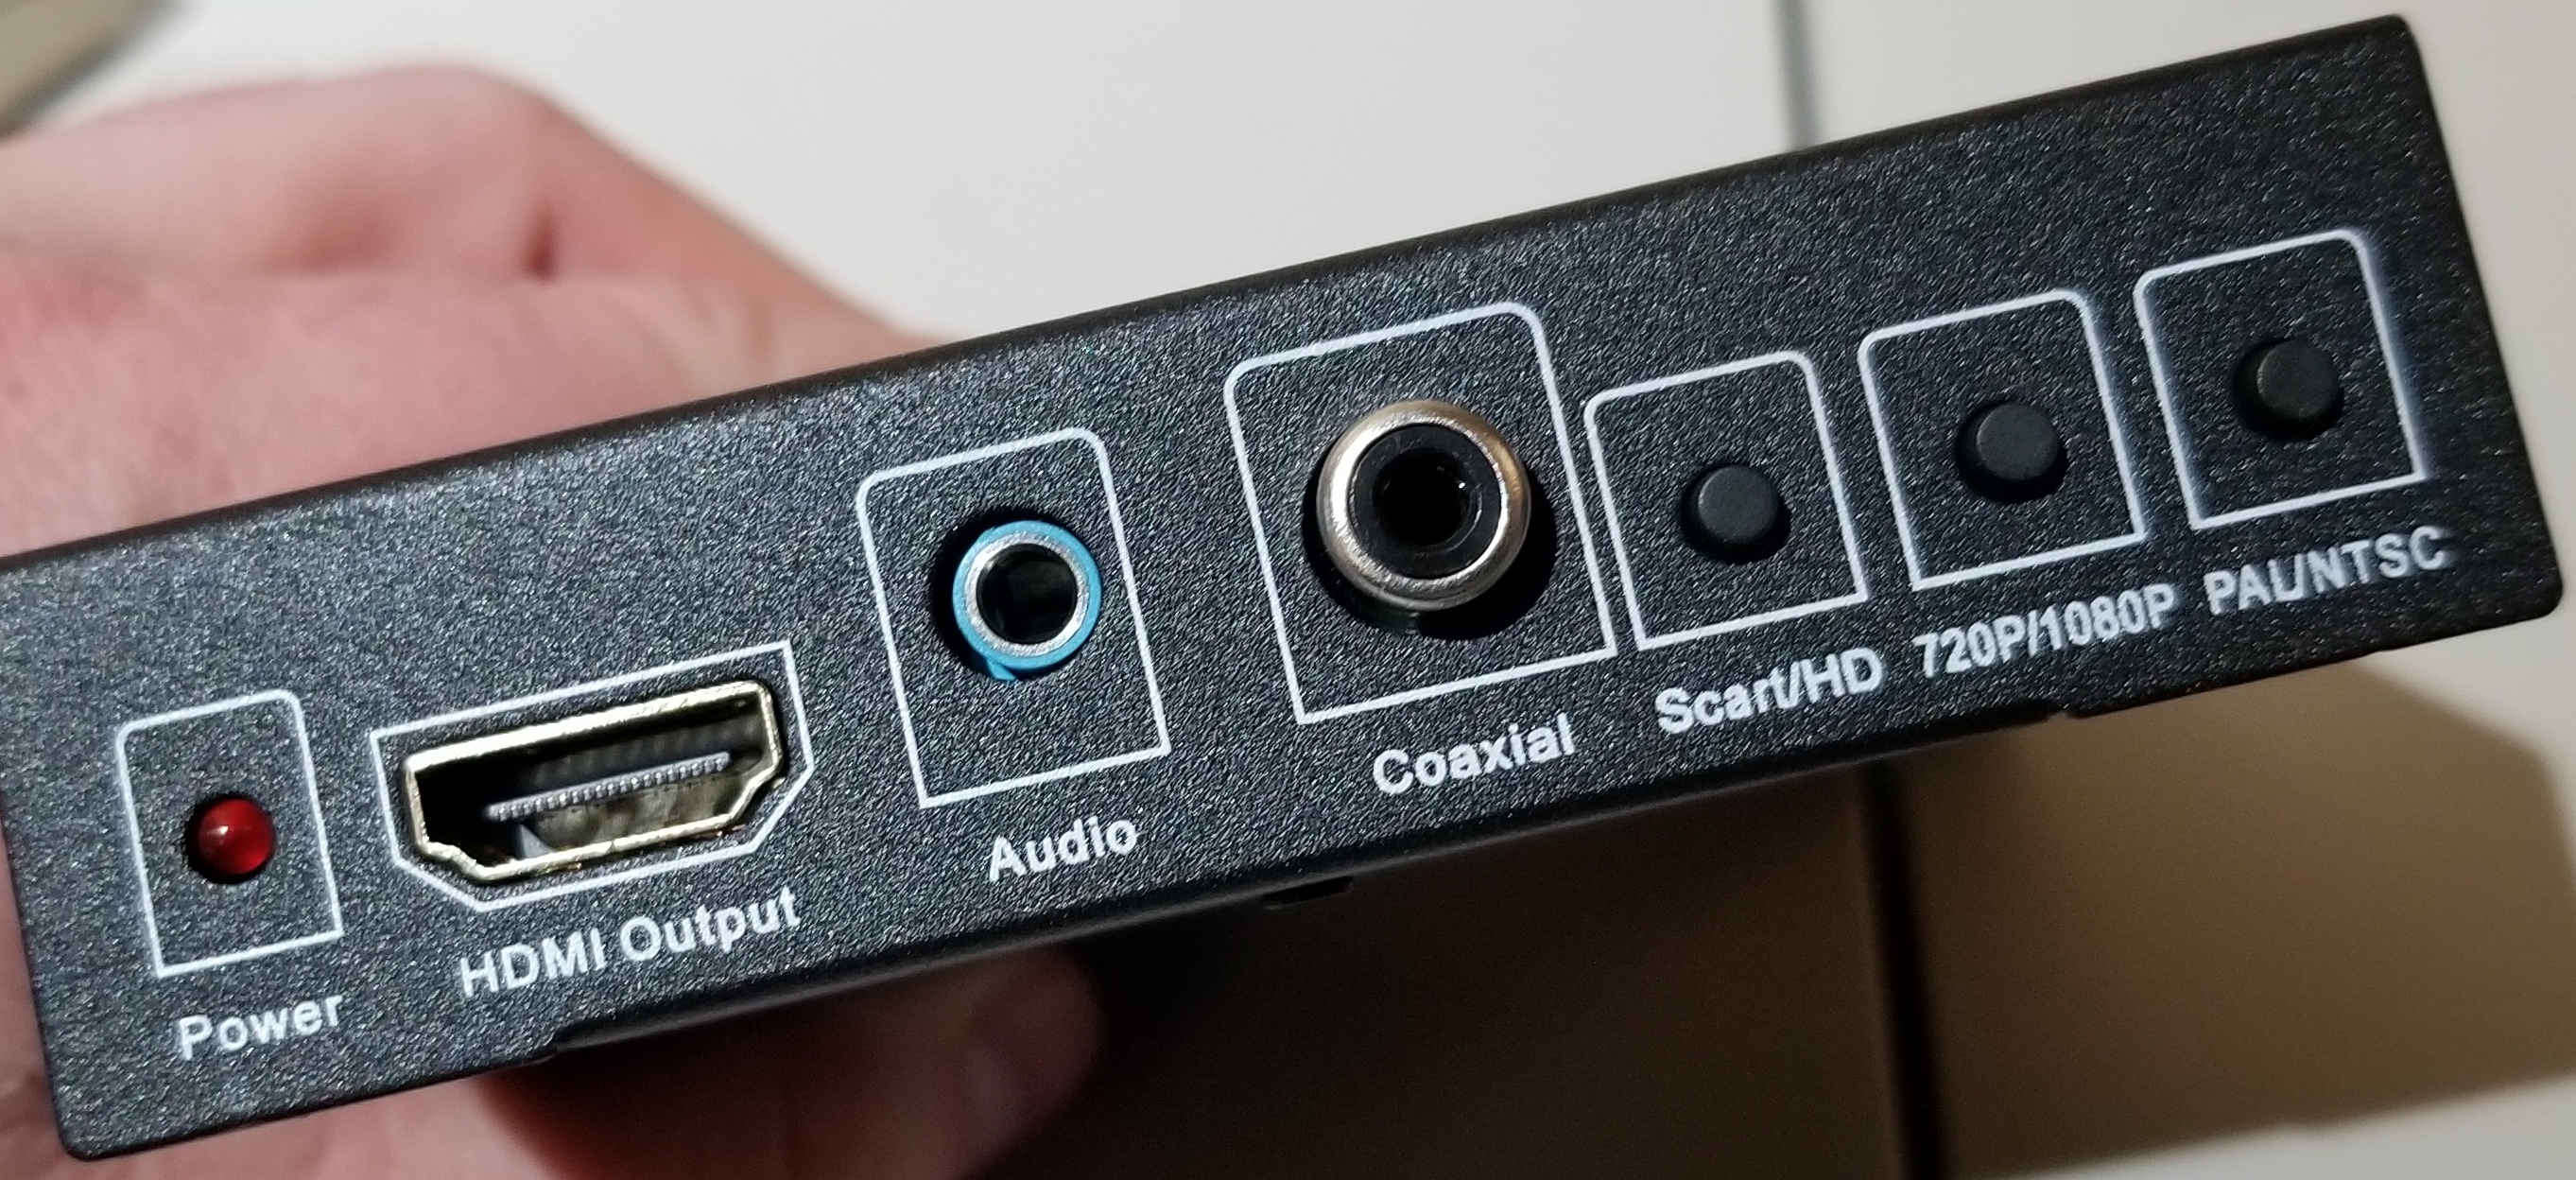 HDMI Output side of converter box